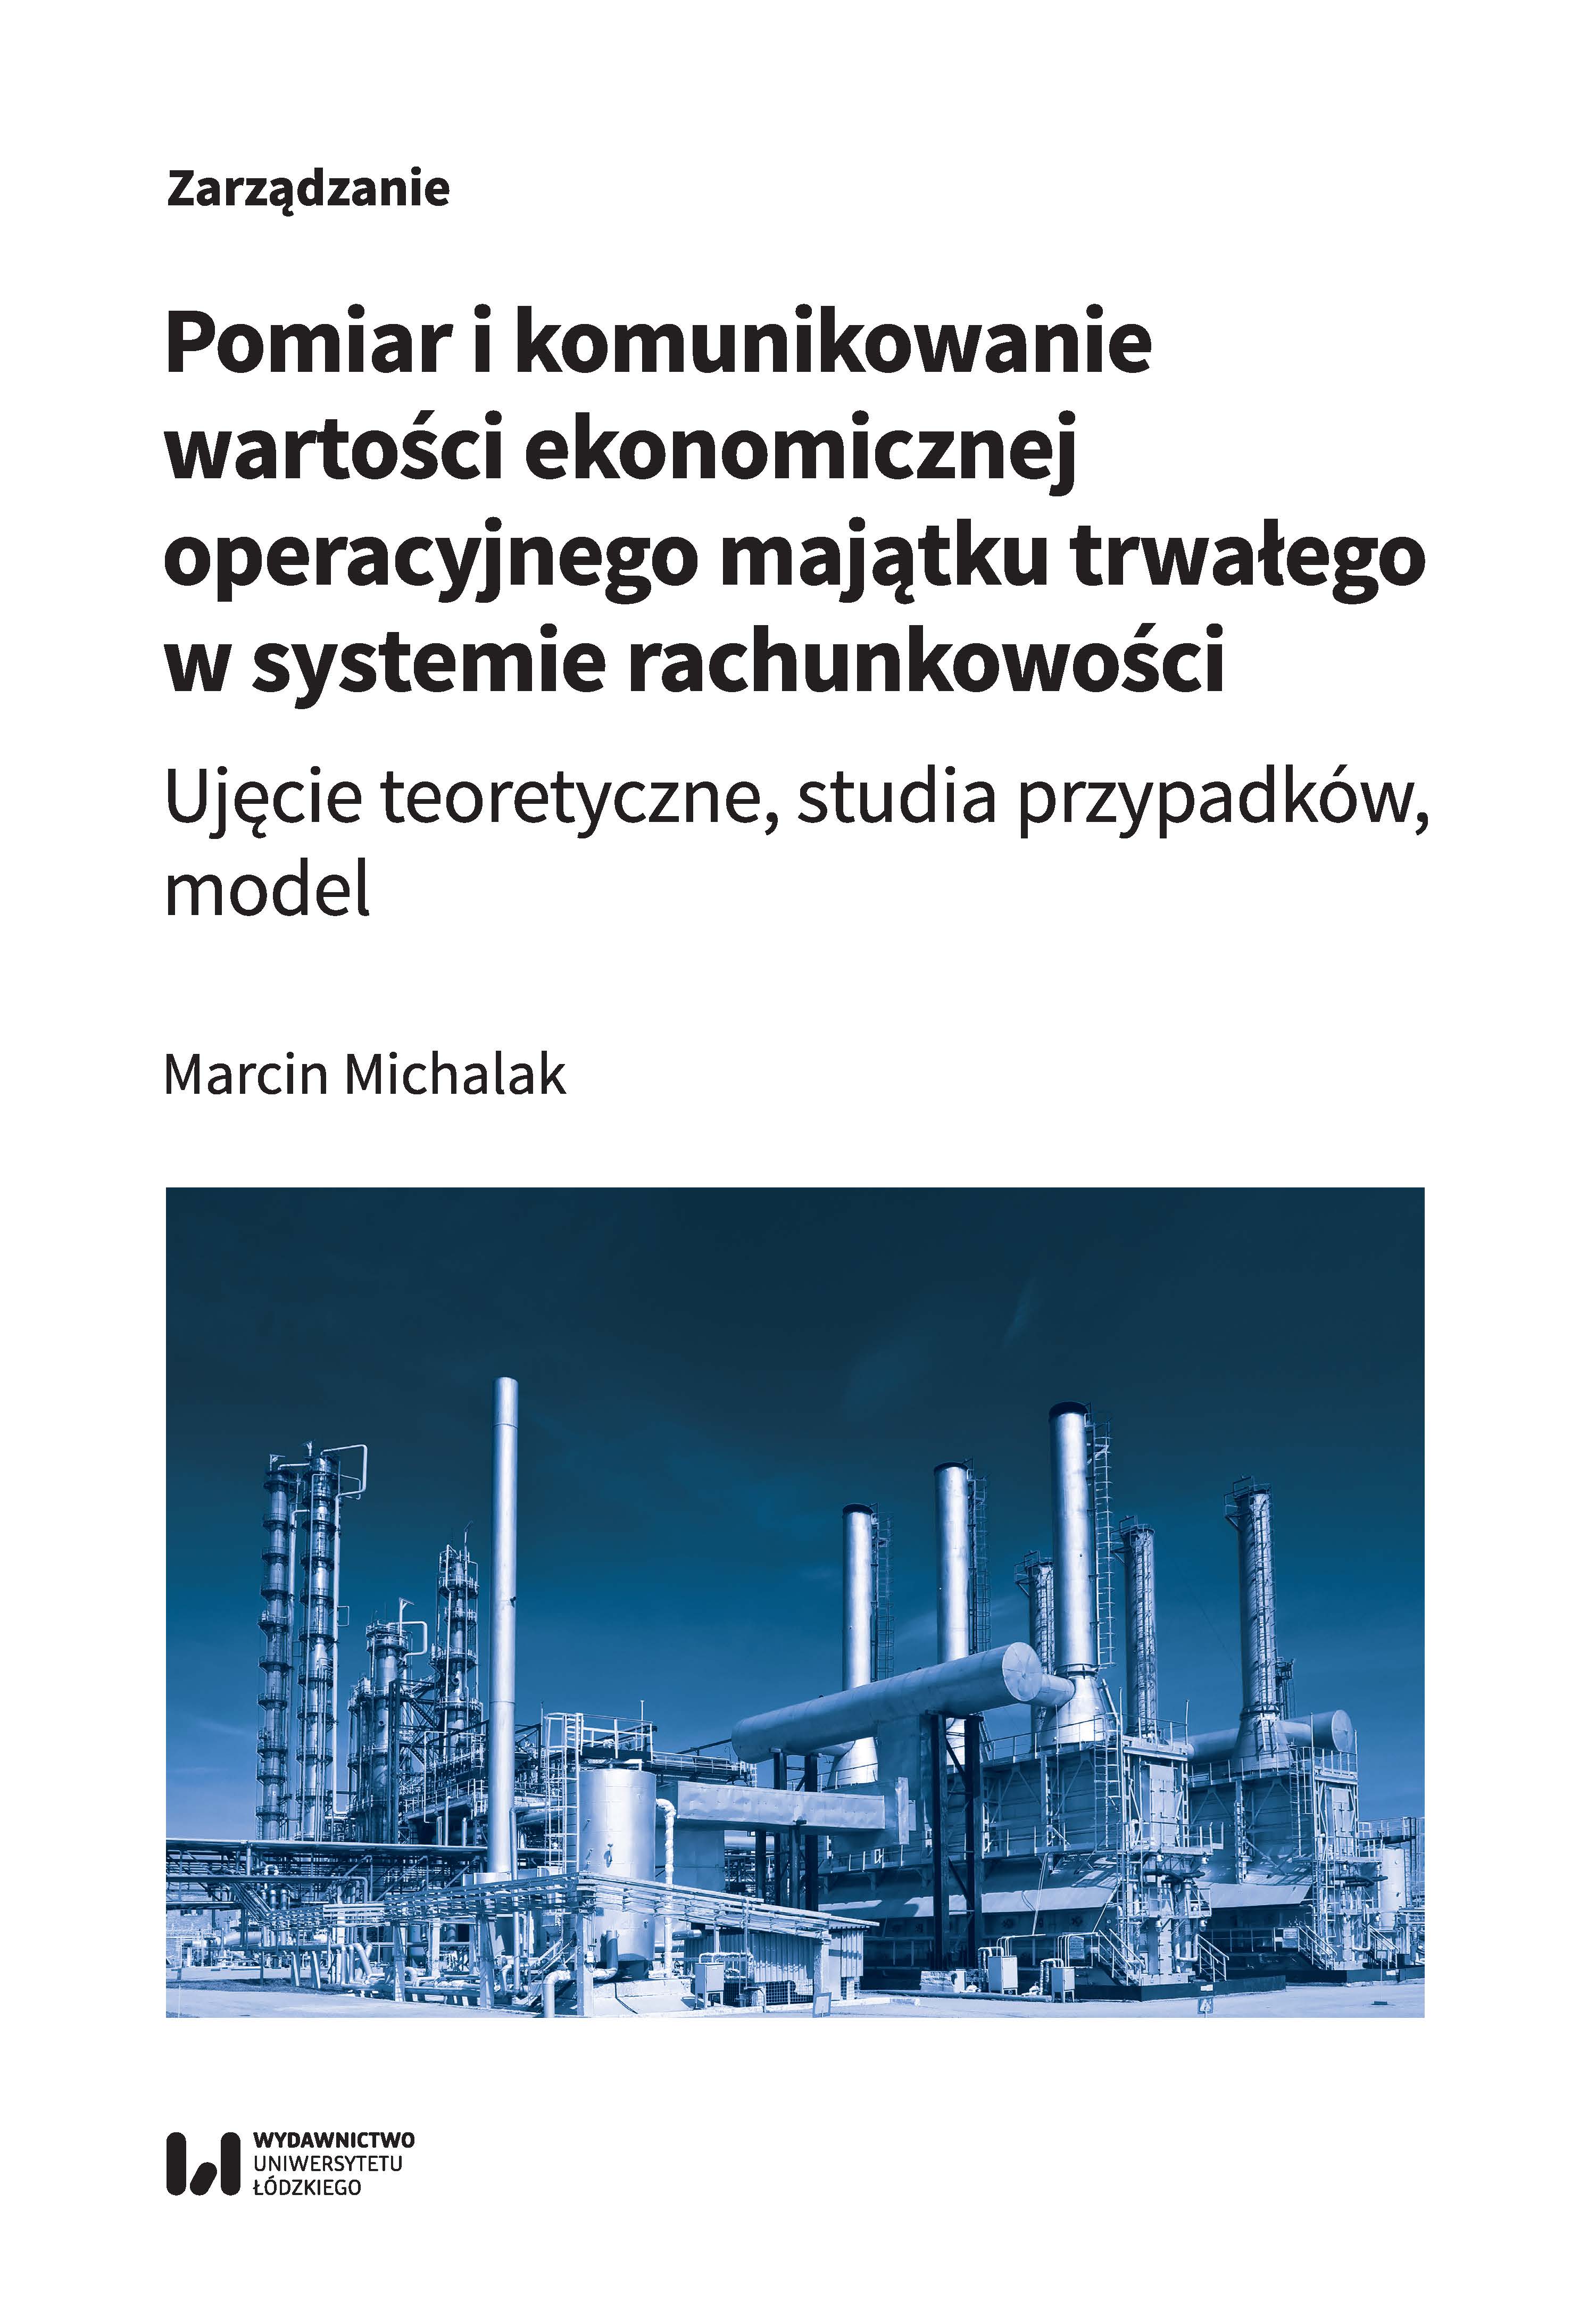 Measurement and communication of the operational fixed assets economic value in the accounting system - theoretical approach, case studies, model Cover Image